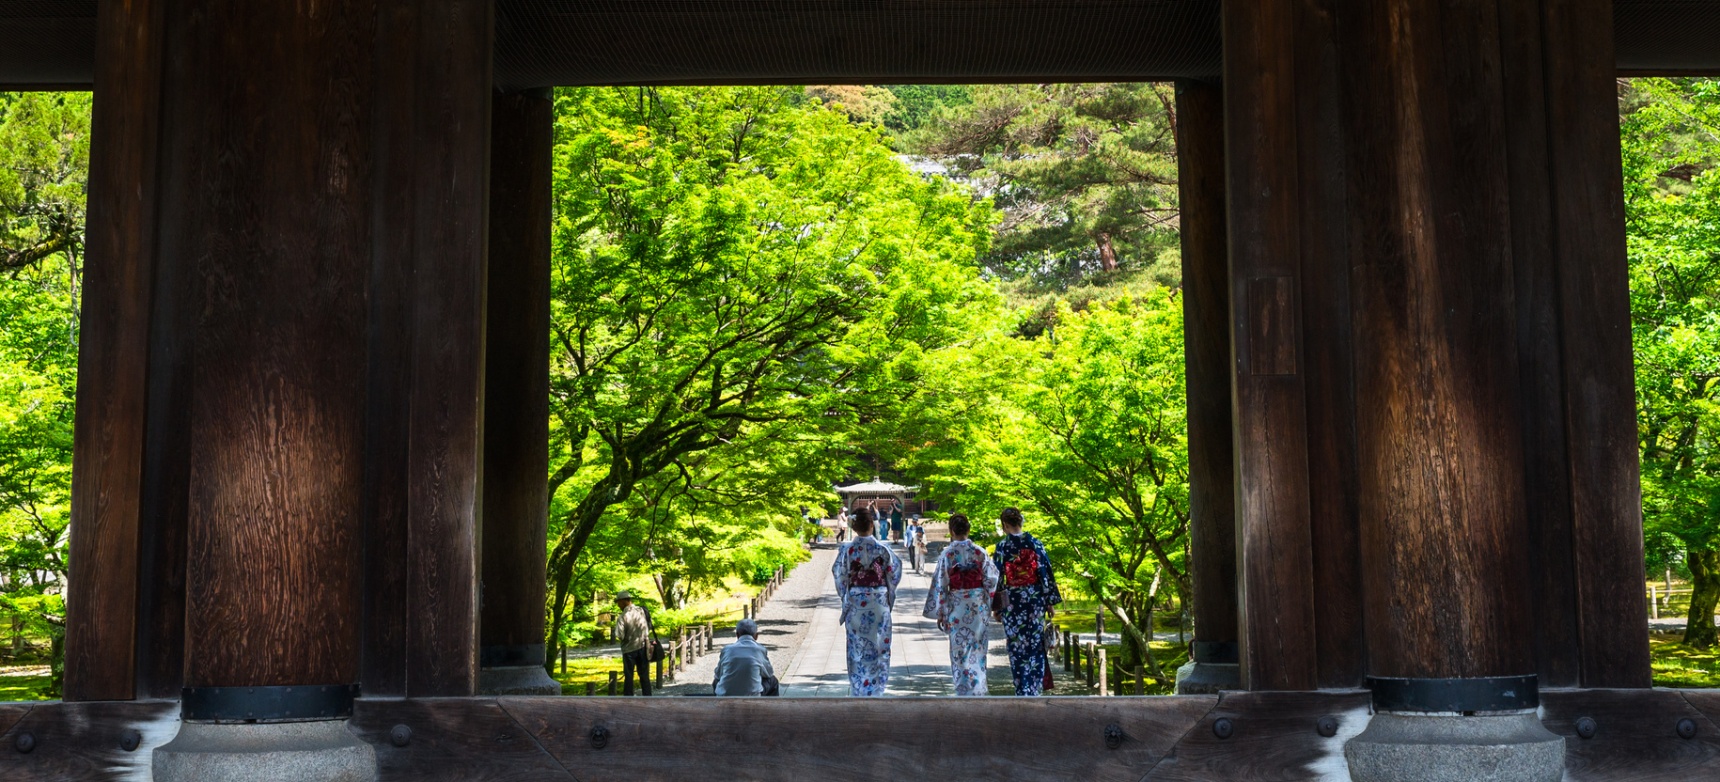 48 Hours in Kyoto on a Budget